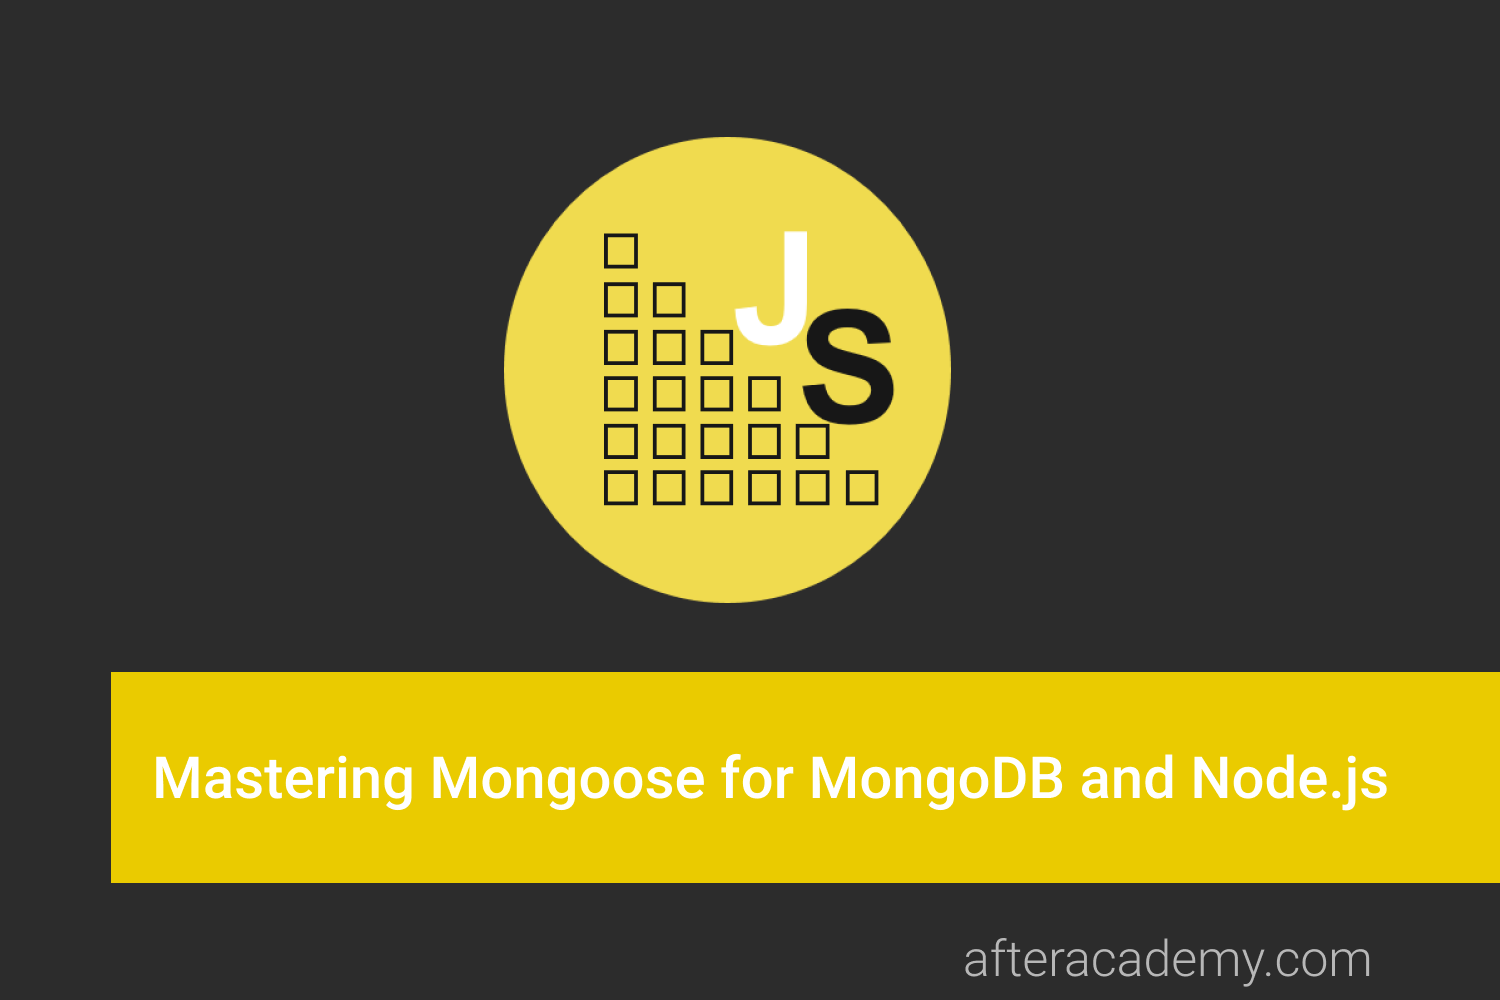 Mastering Mongoose for MongoDB and Nodejs